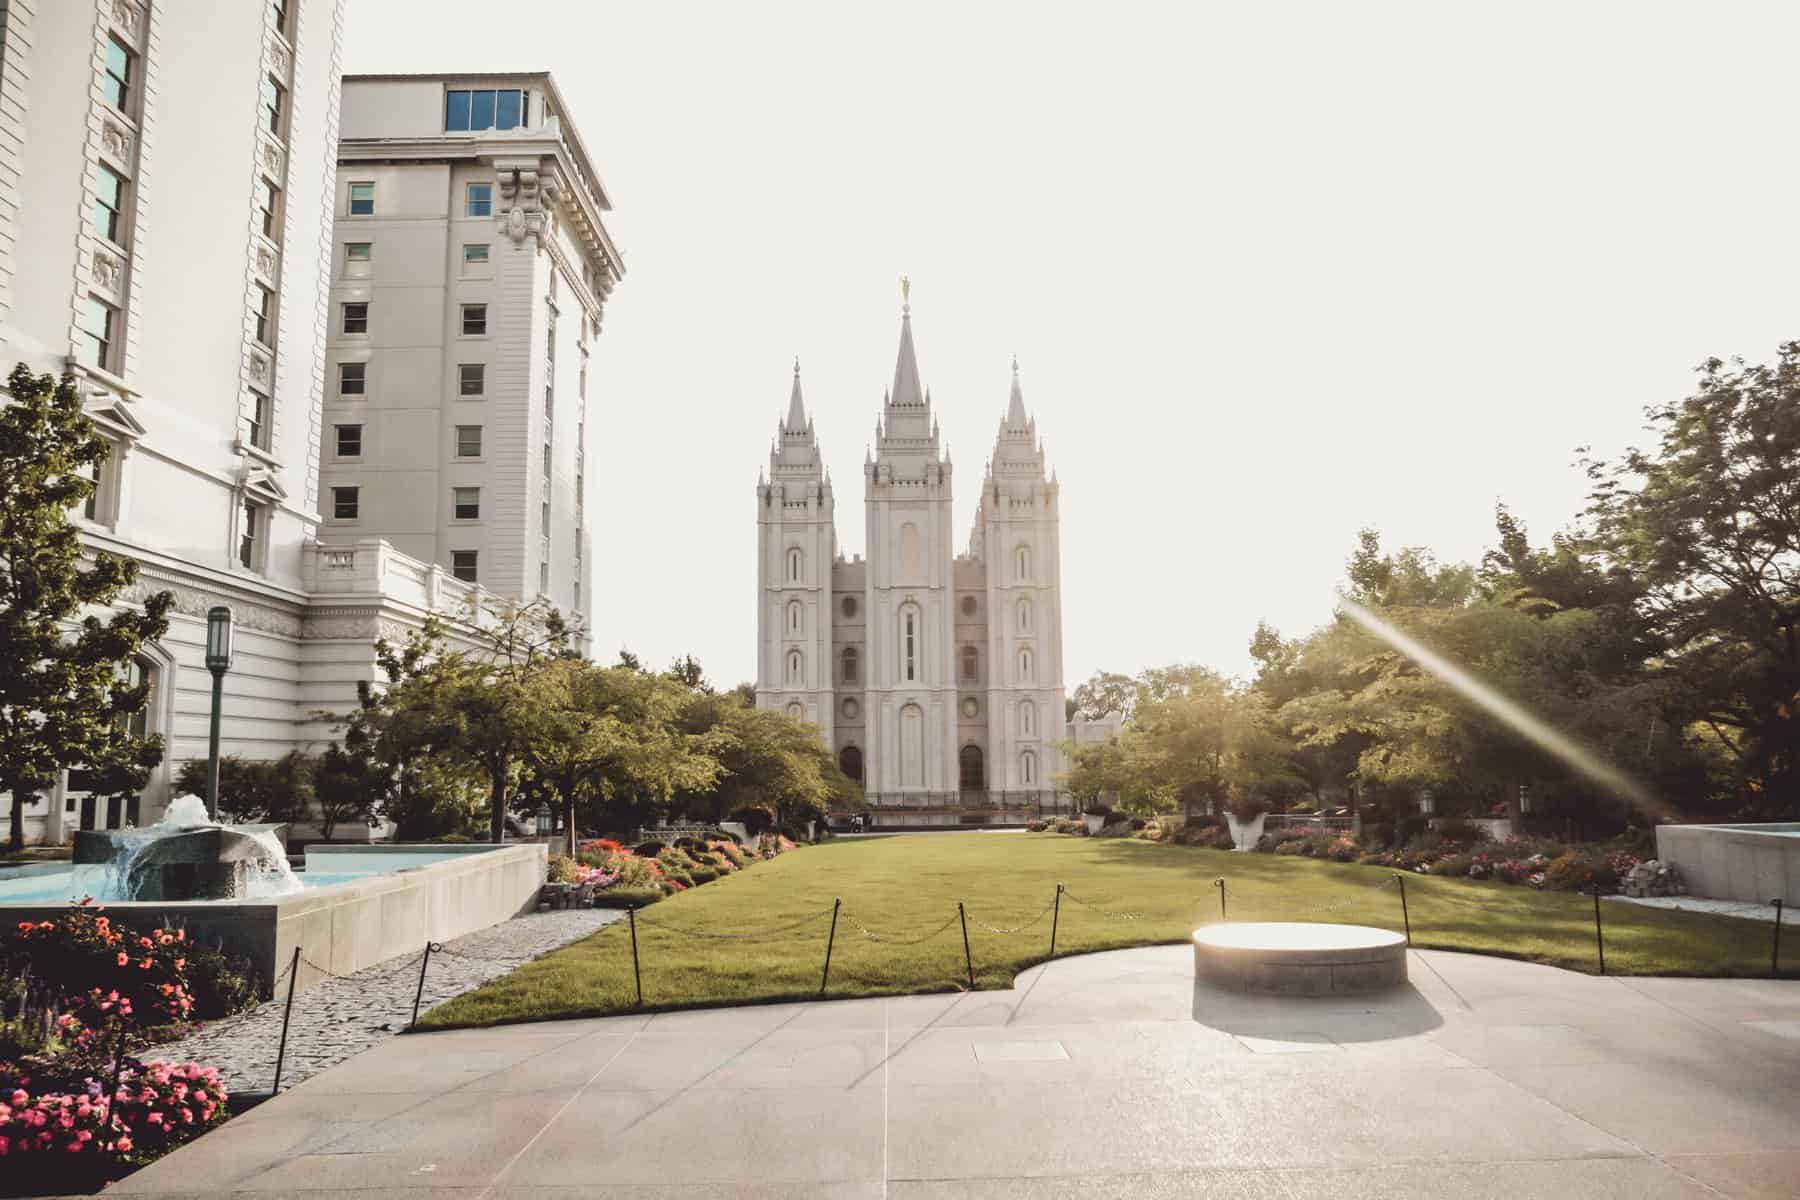 The Mormon temple in Salt Lake City, Utah is pictured from the front.